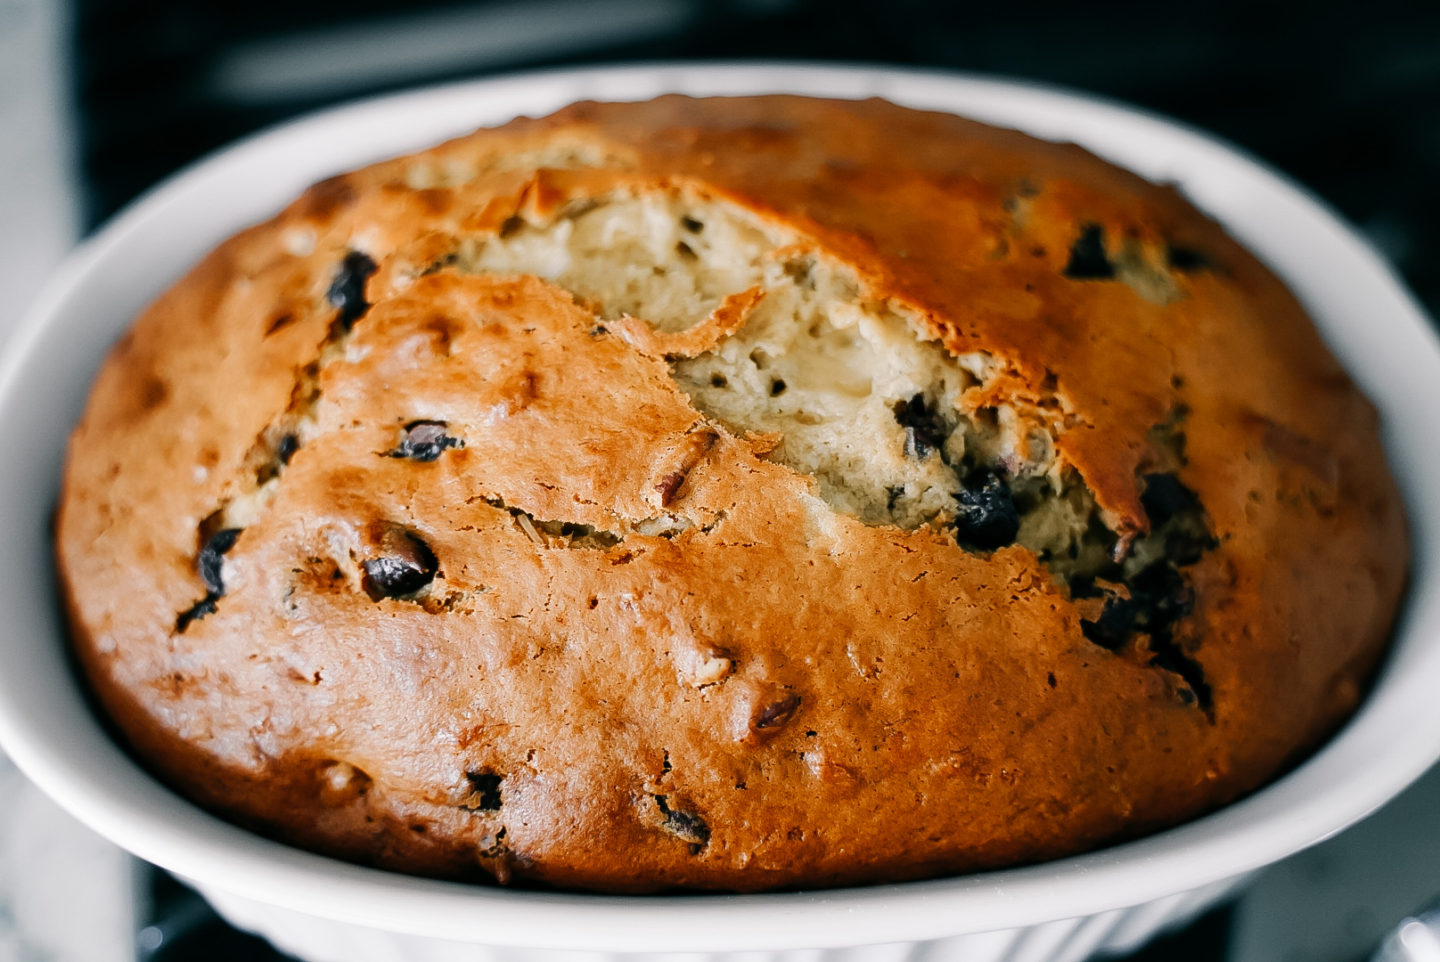 The BEST Chocolate Chip, Coconut, Banana Nut Bread Recipe